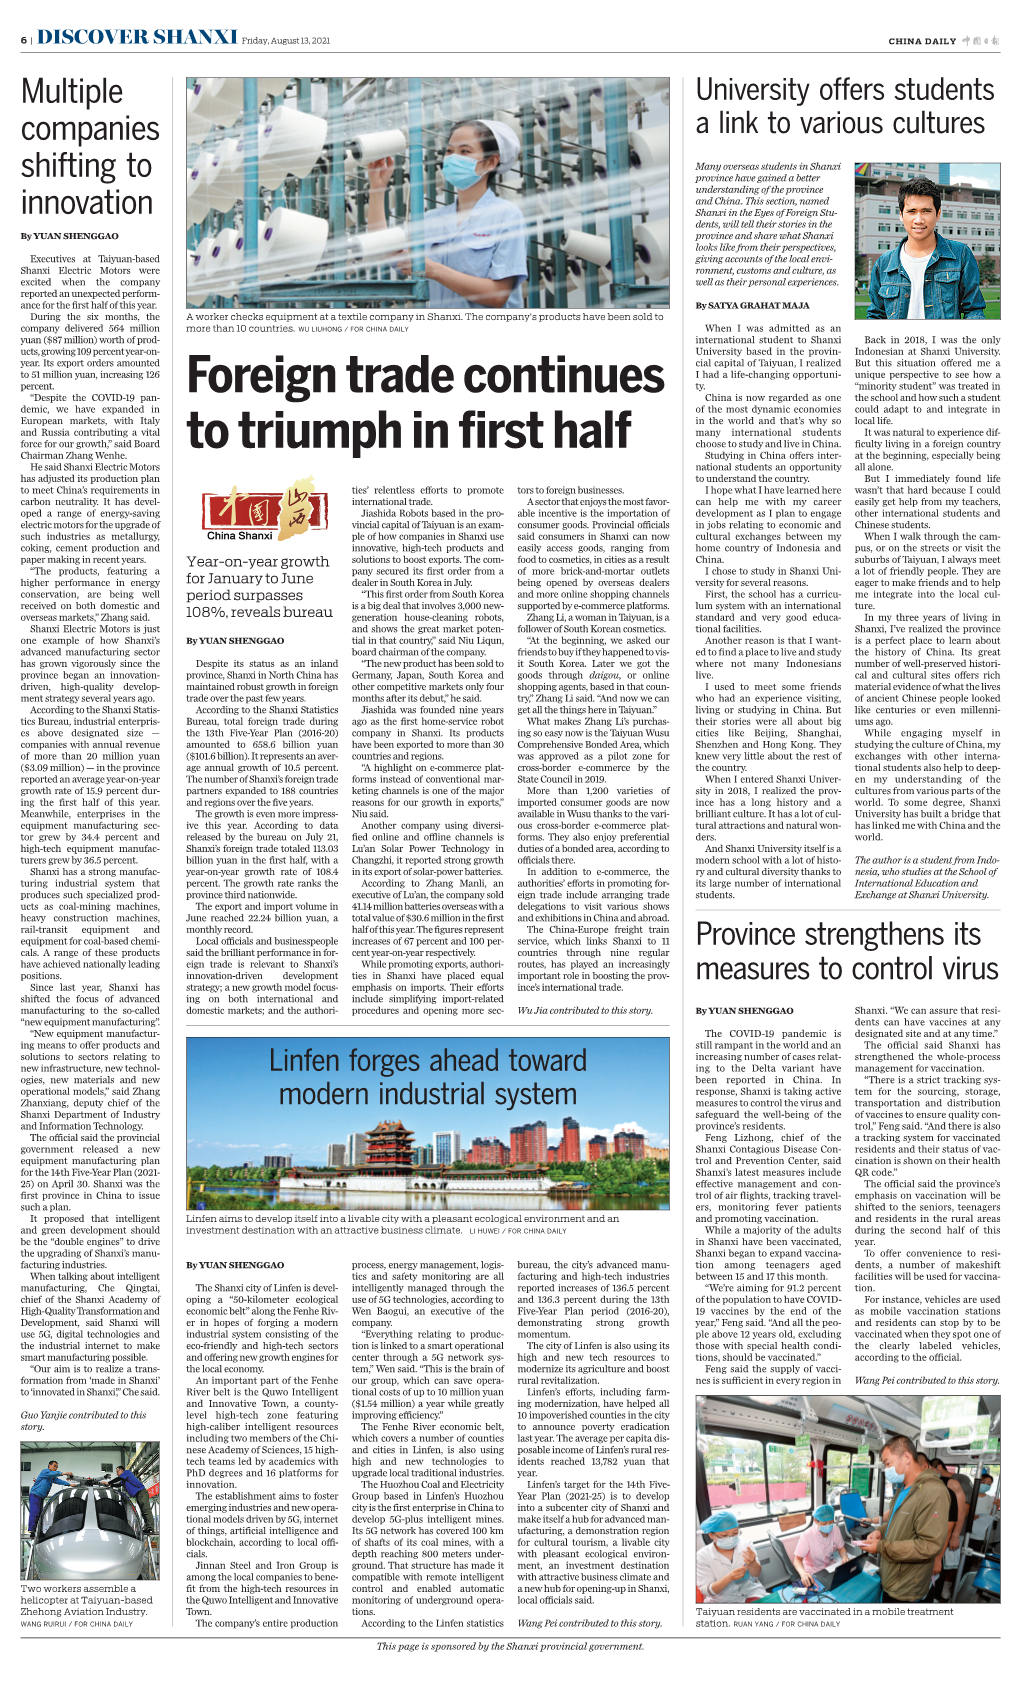 Foreign Trade Continues to Triumph in First Half